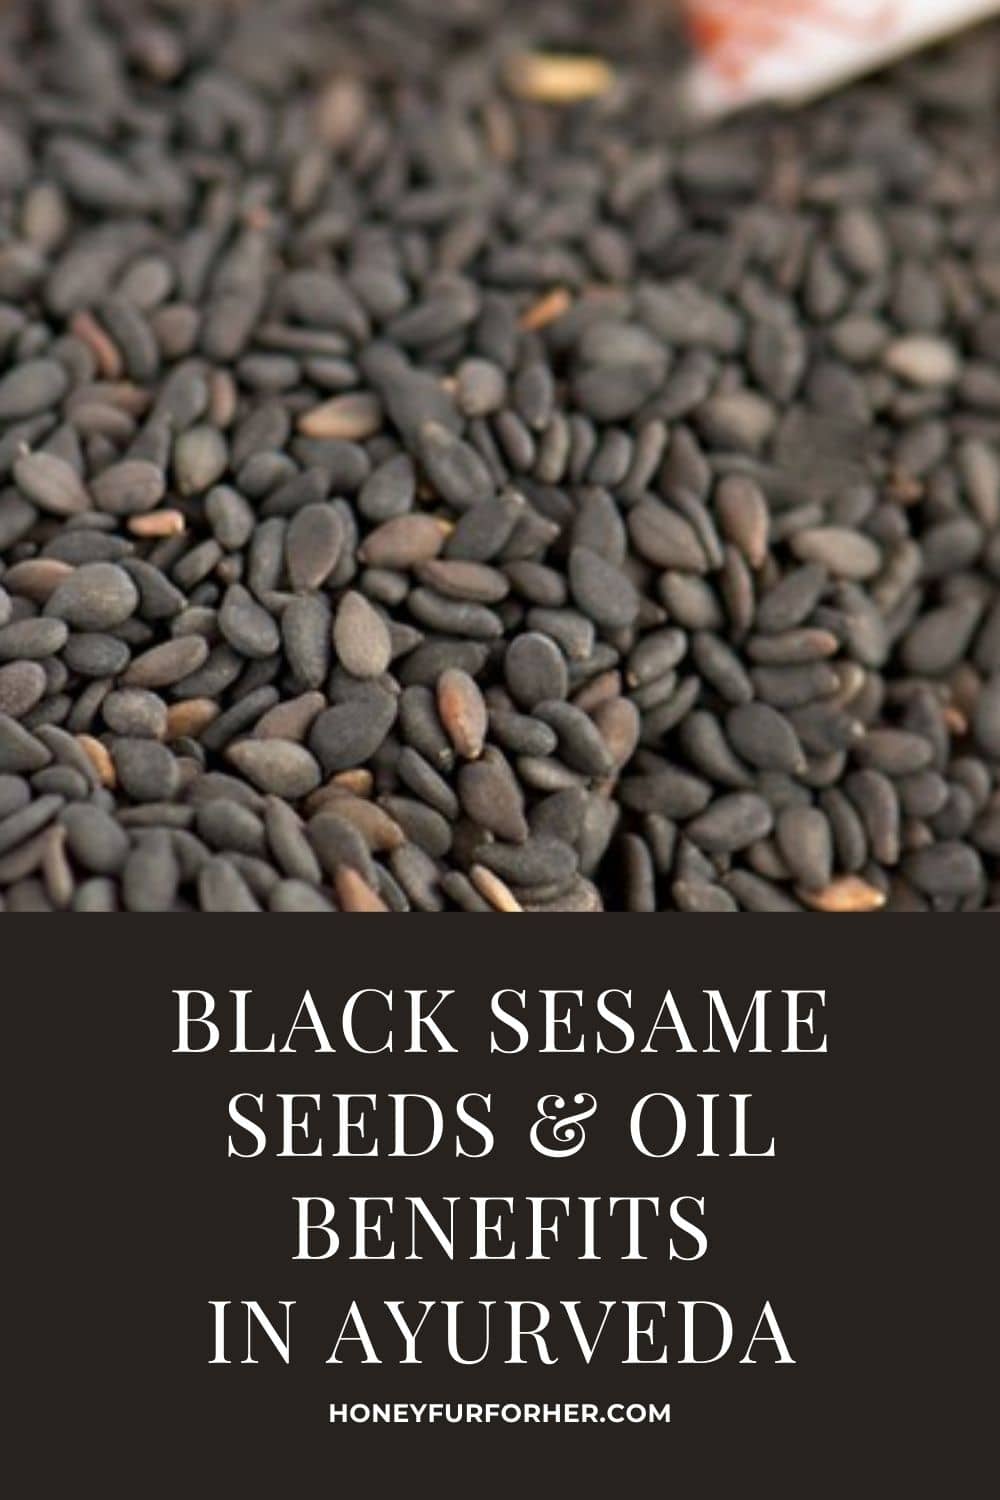 Black Sesame Oil And Seeds Benefits In Ayurveda Pinterest Pin 1